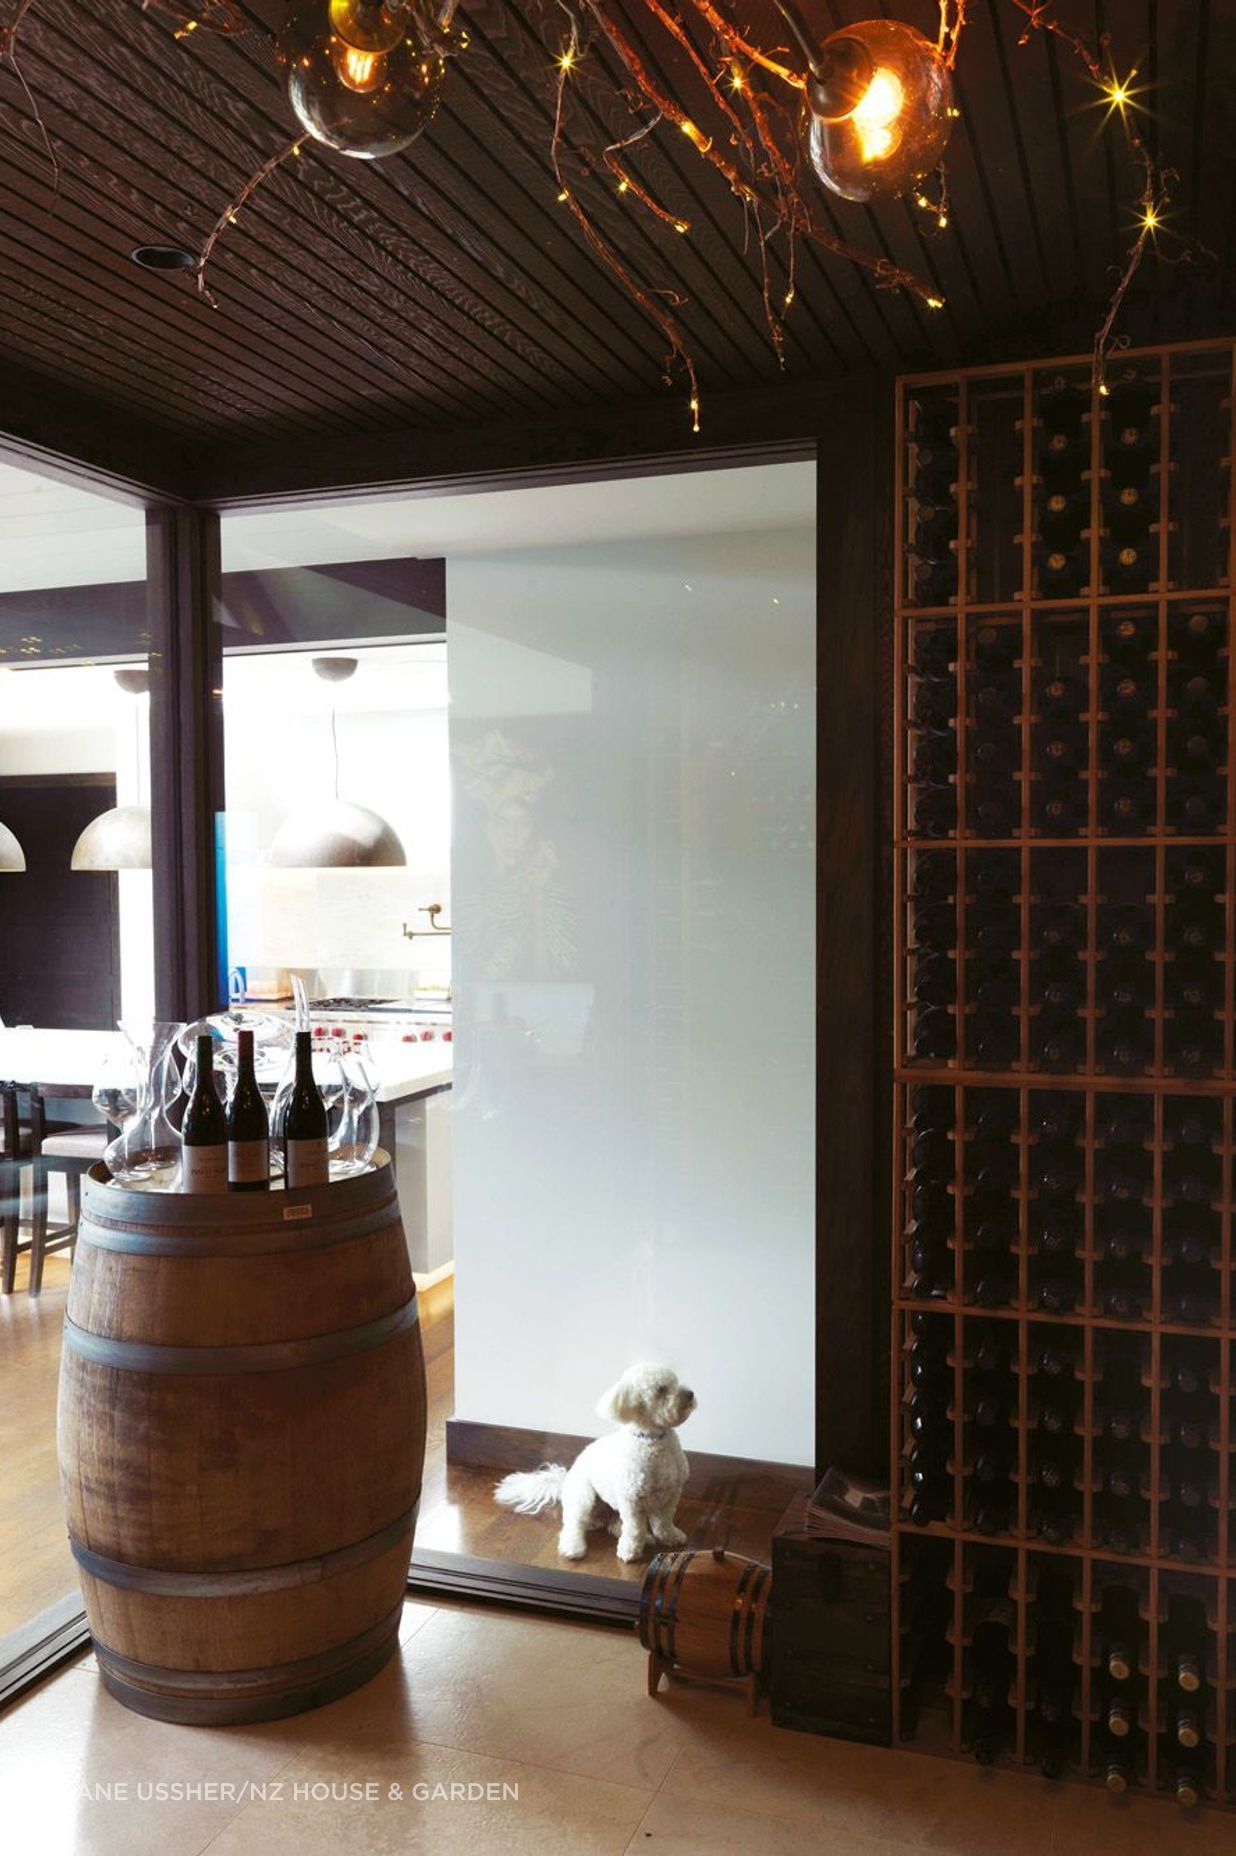 A new wine cellar opens to the family room; the couple spotted a light fitting made of merlot grapevines by James Russ at Tantalus Estate winery on Waiheke Island, so they commissioned him to make something similar; the newest member of the family, Archie, is a havanese, the national dog of Cuba.